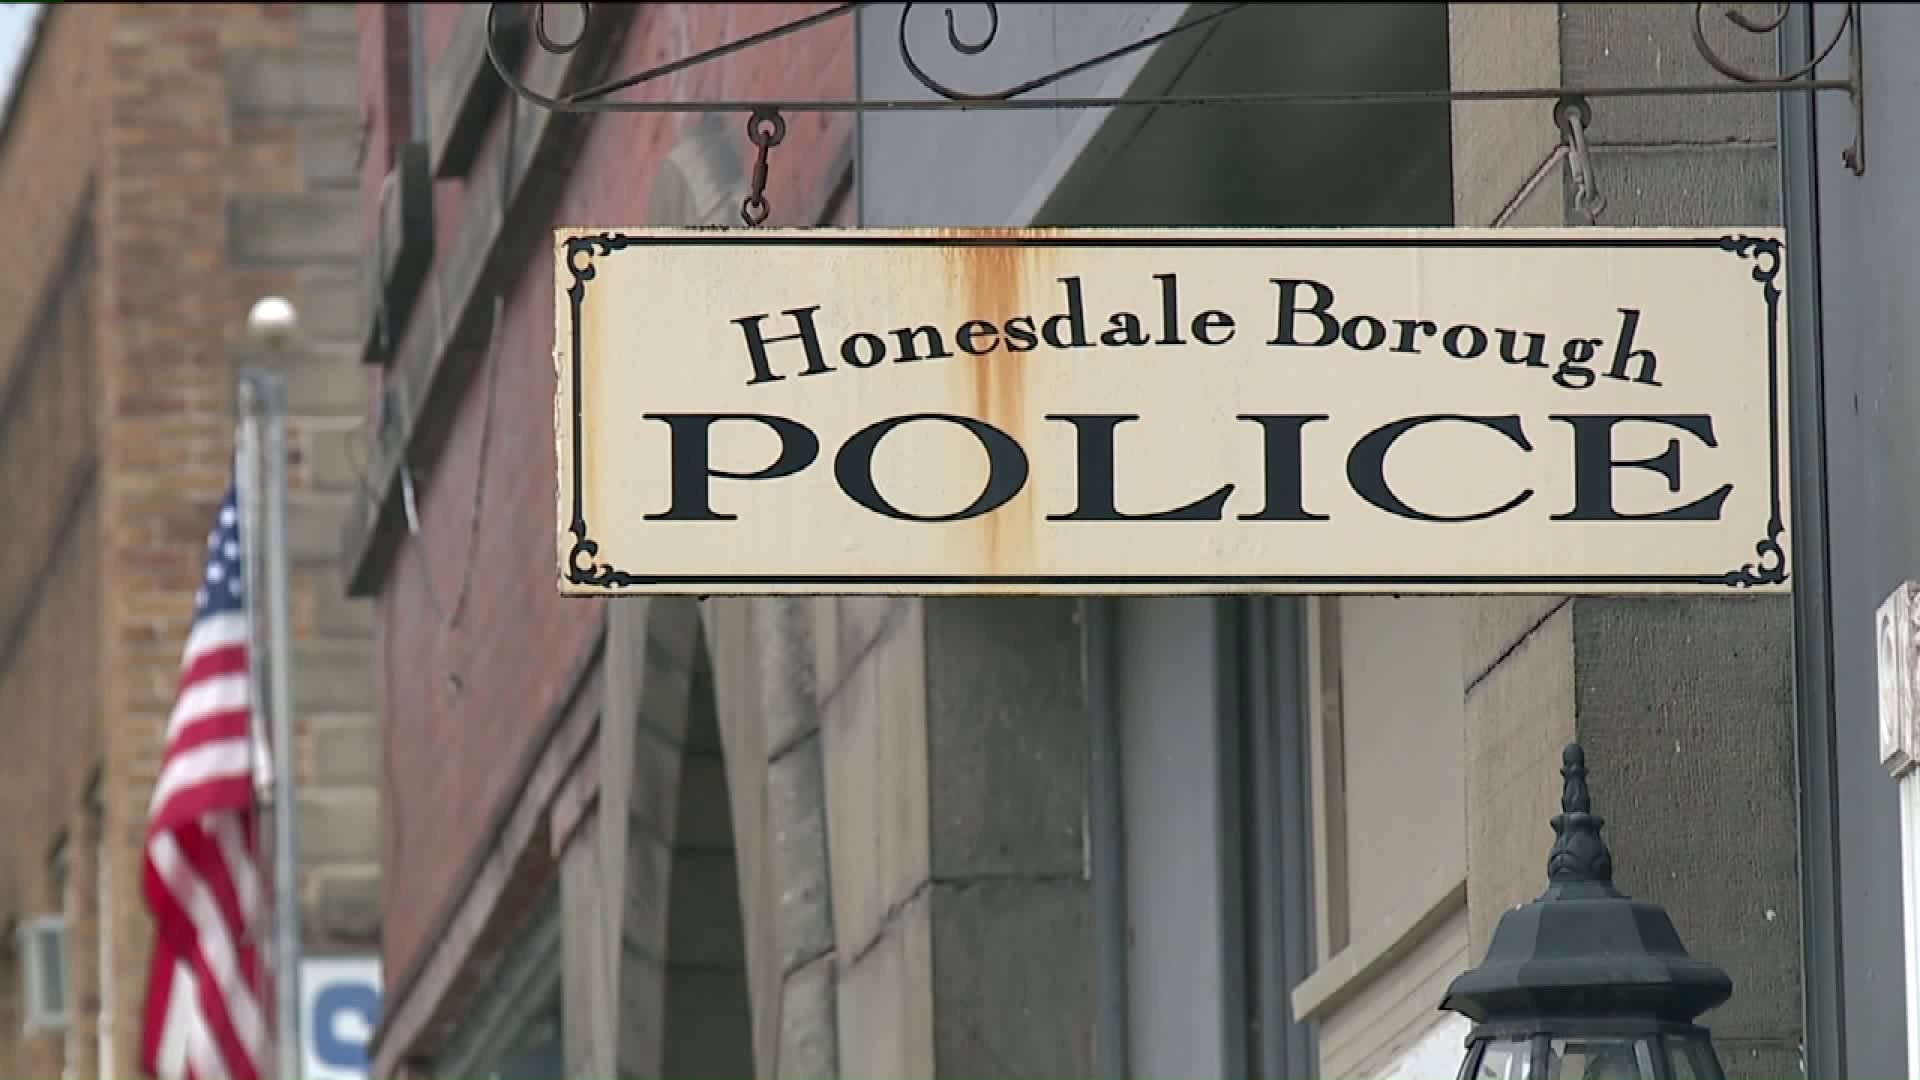 Safety at Stake in Honesdale Police Station?